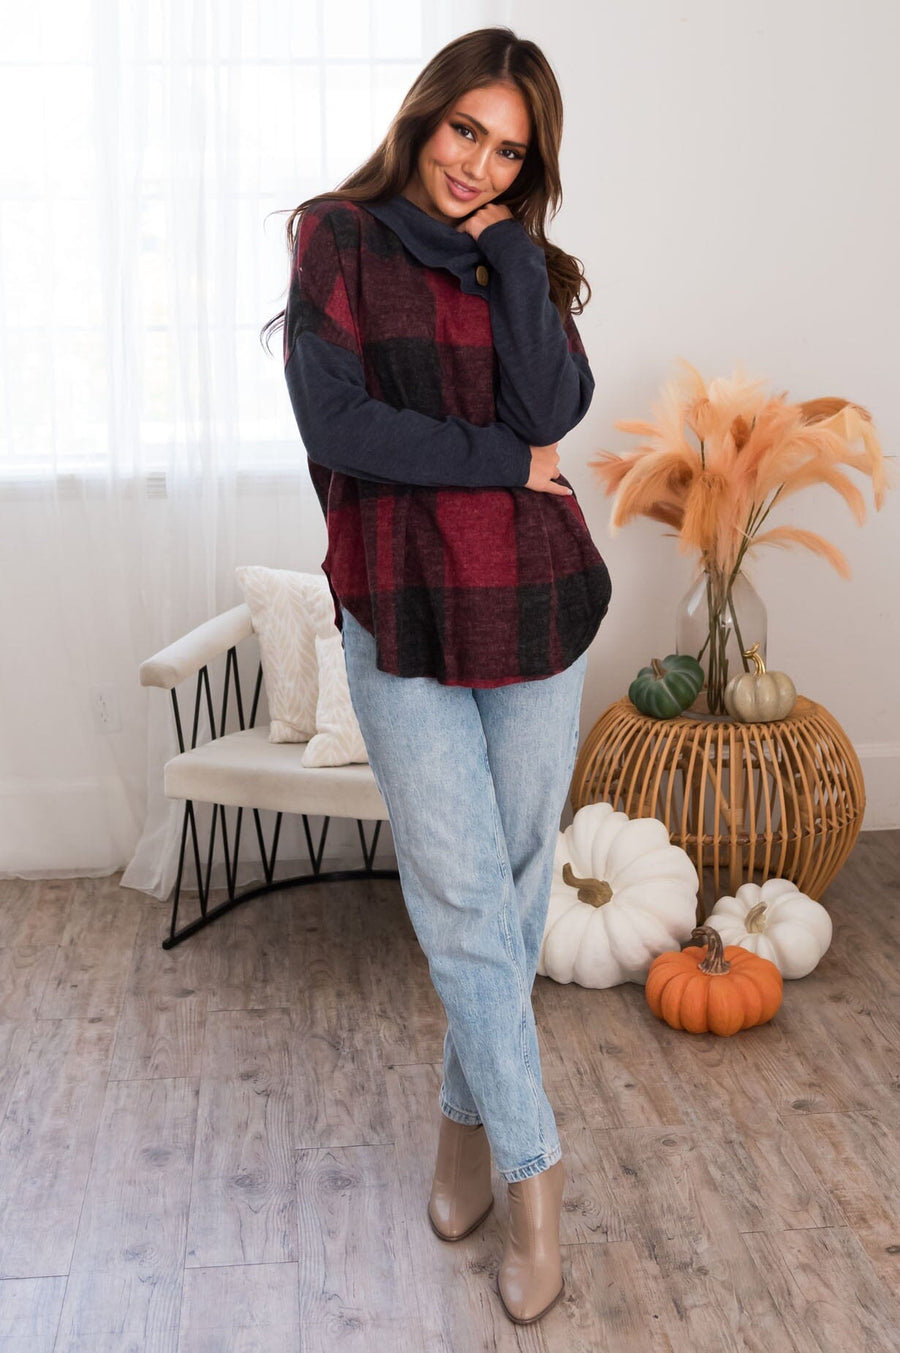 No Goodbyes Modest Cowl Neck Sweater